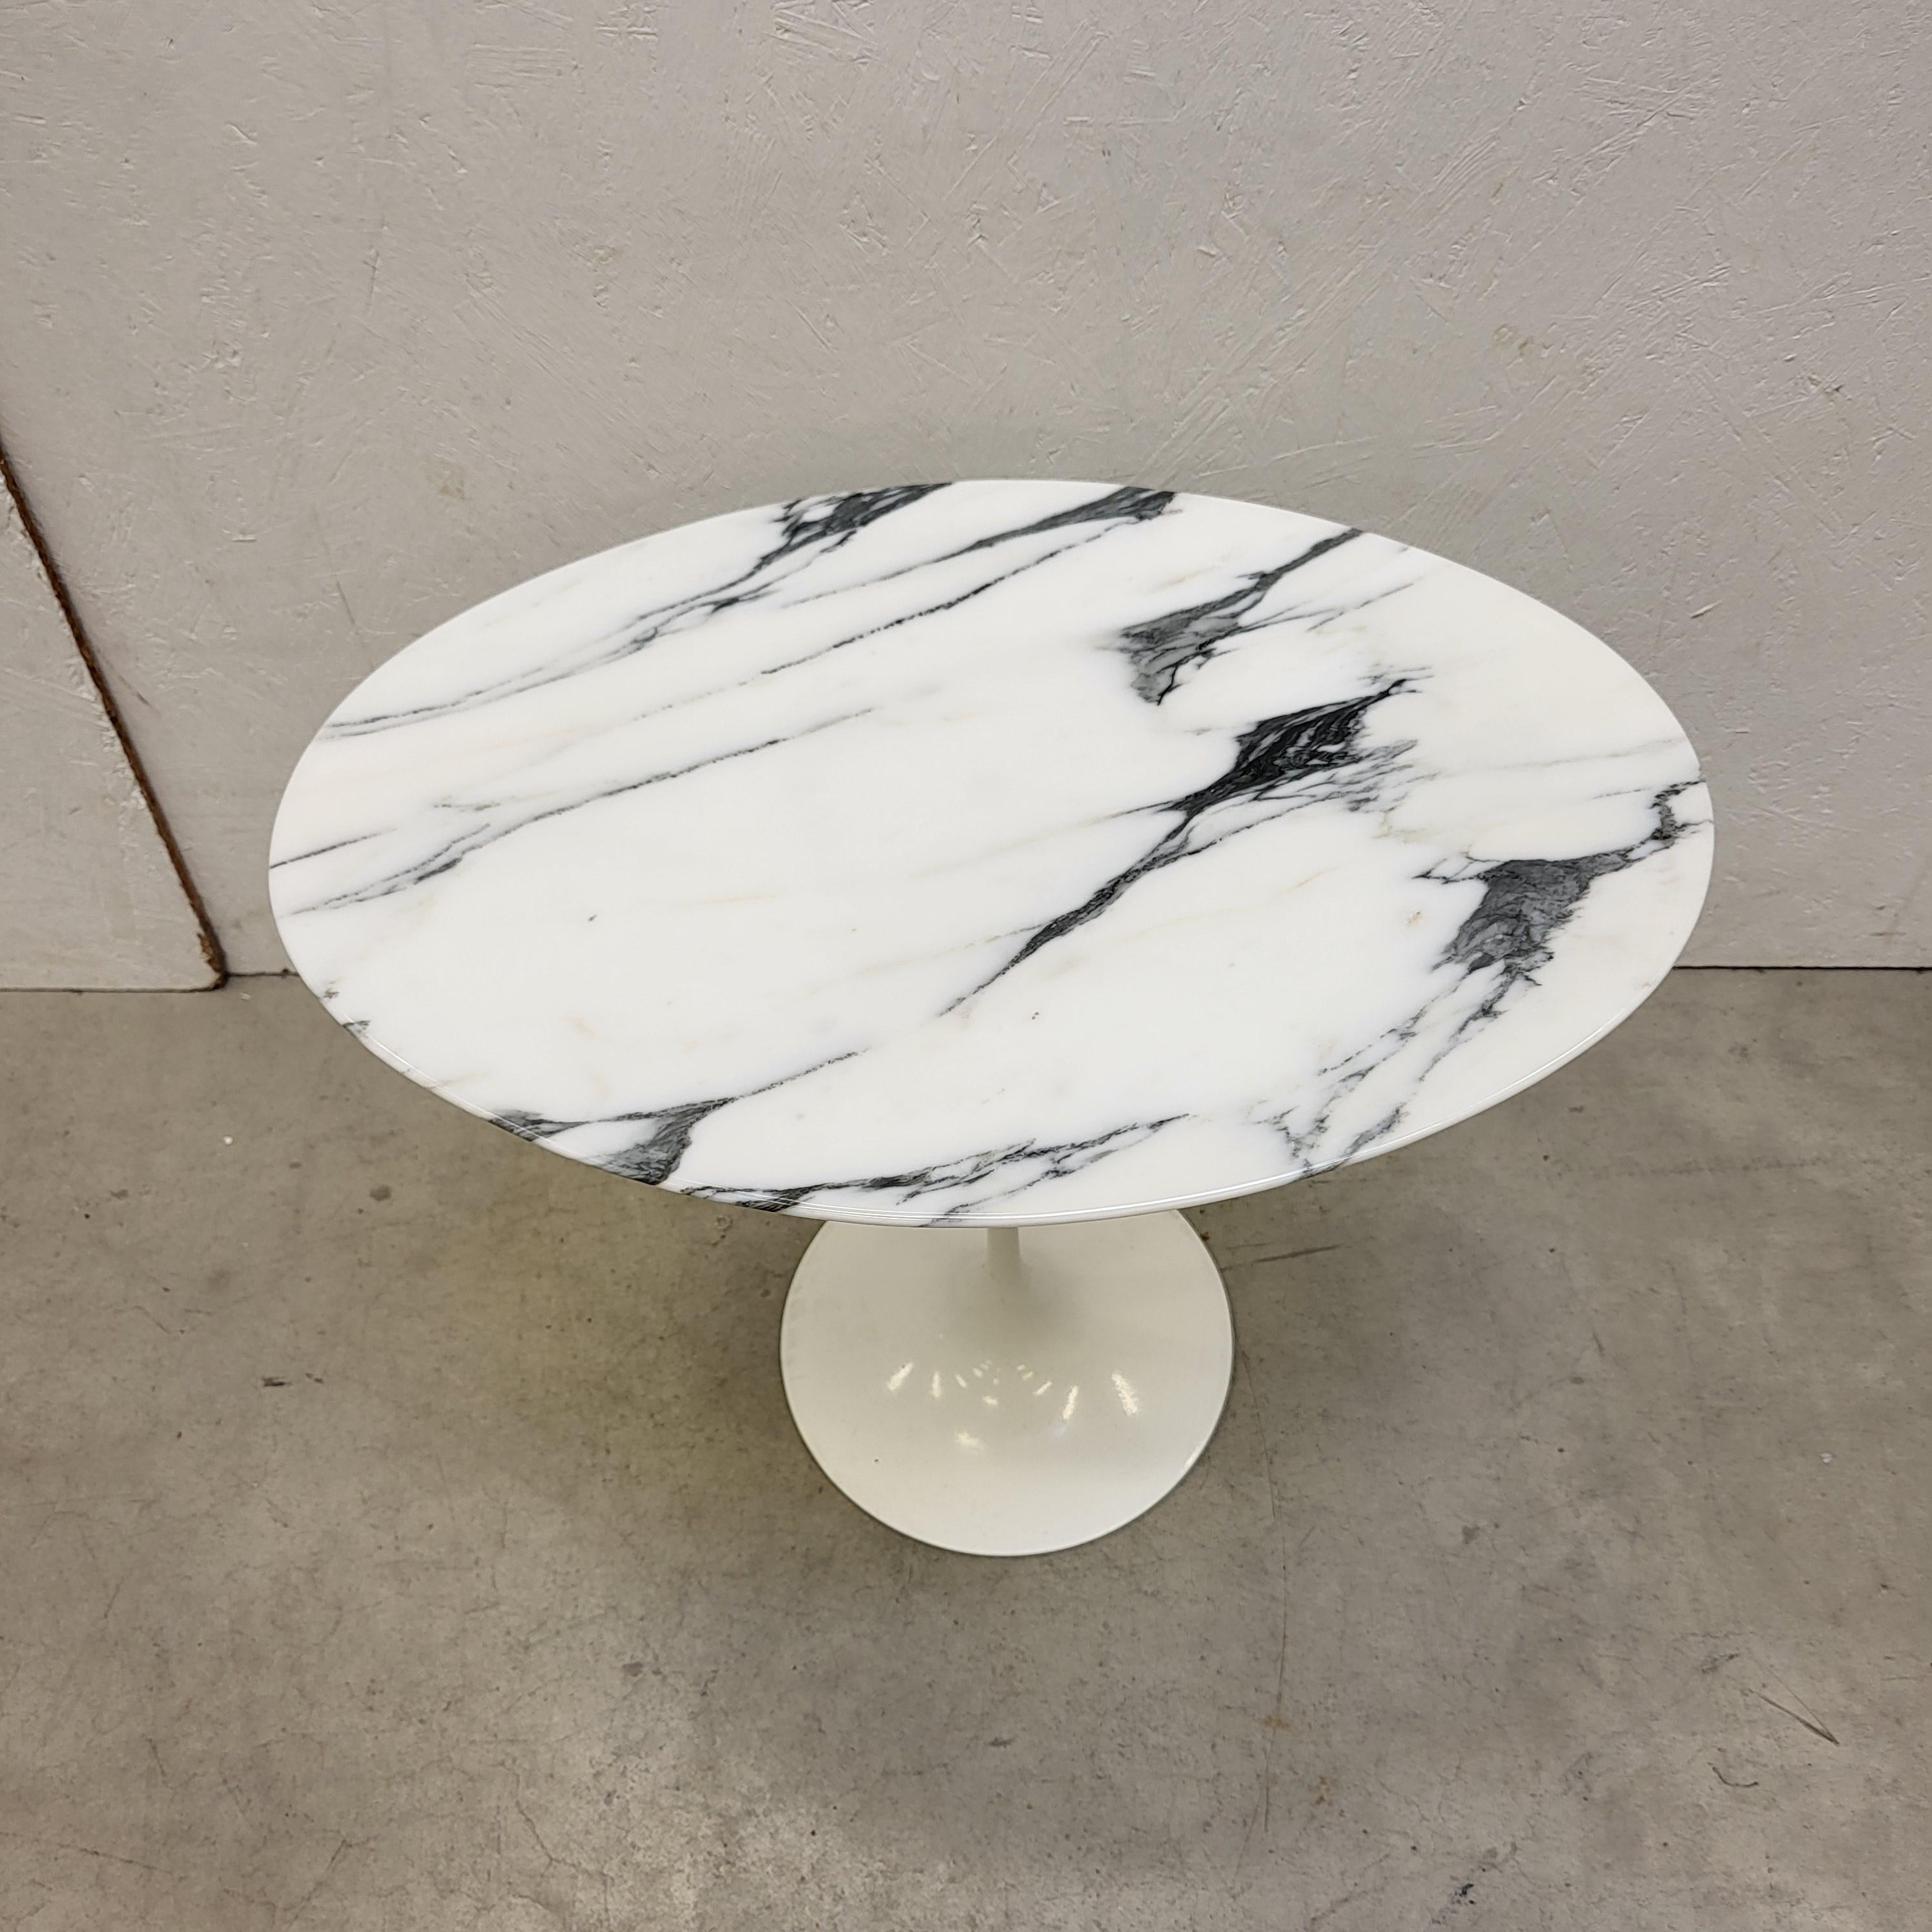 Fine and very nice oval tulip side table by Eero Saarinen for Knoll International.

The marble has an amazing structure and this example comes in a very good condition.
The marble hasn´t any chips or damage.

The table was made in the 1970s and